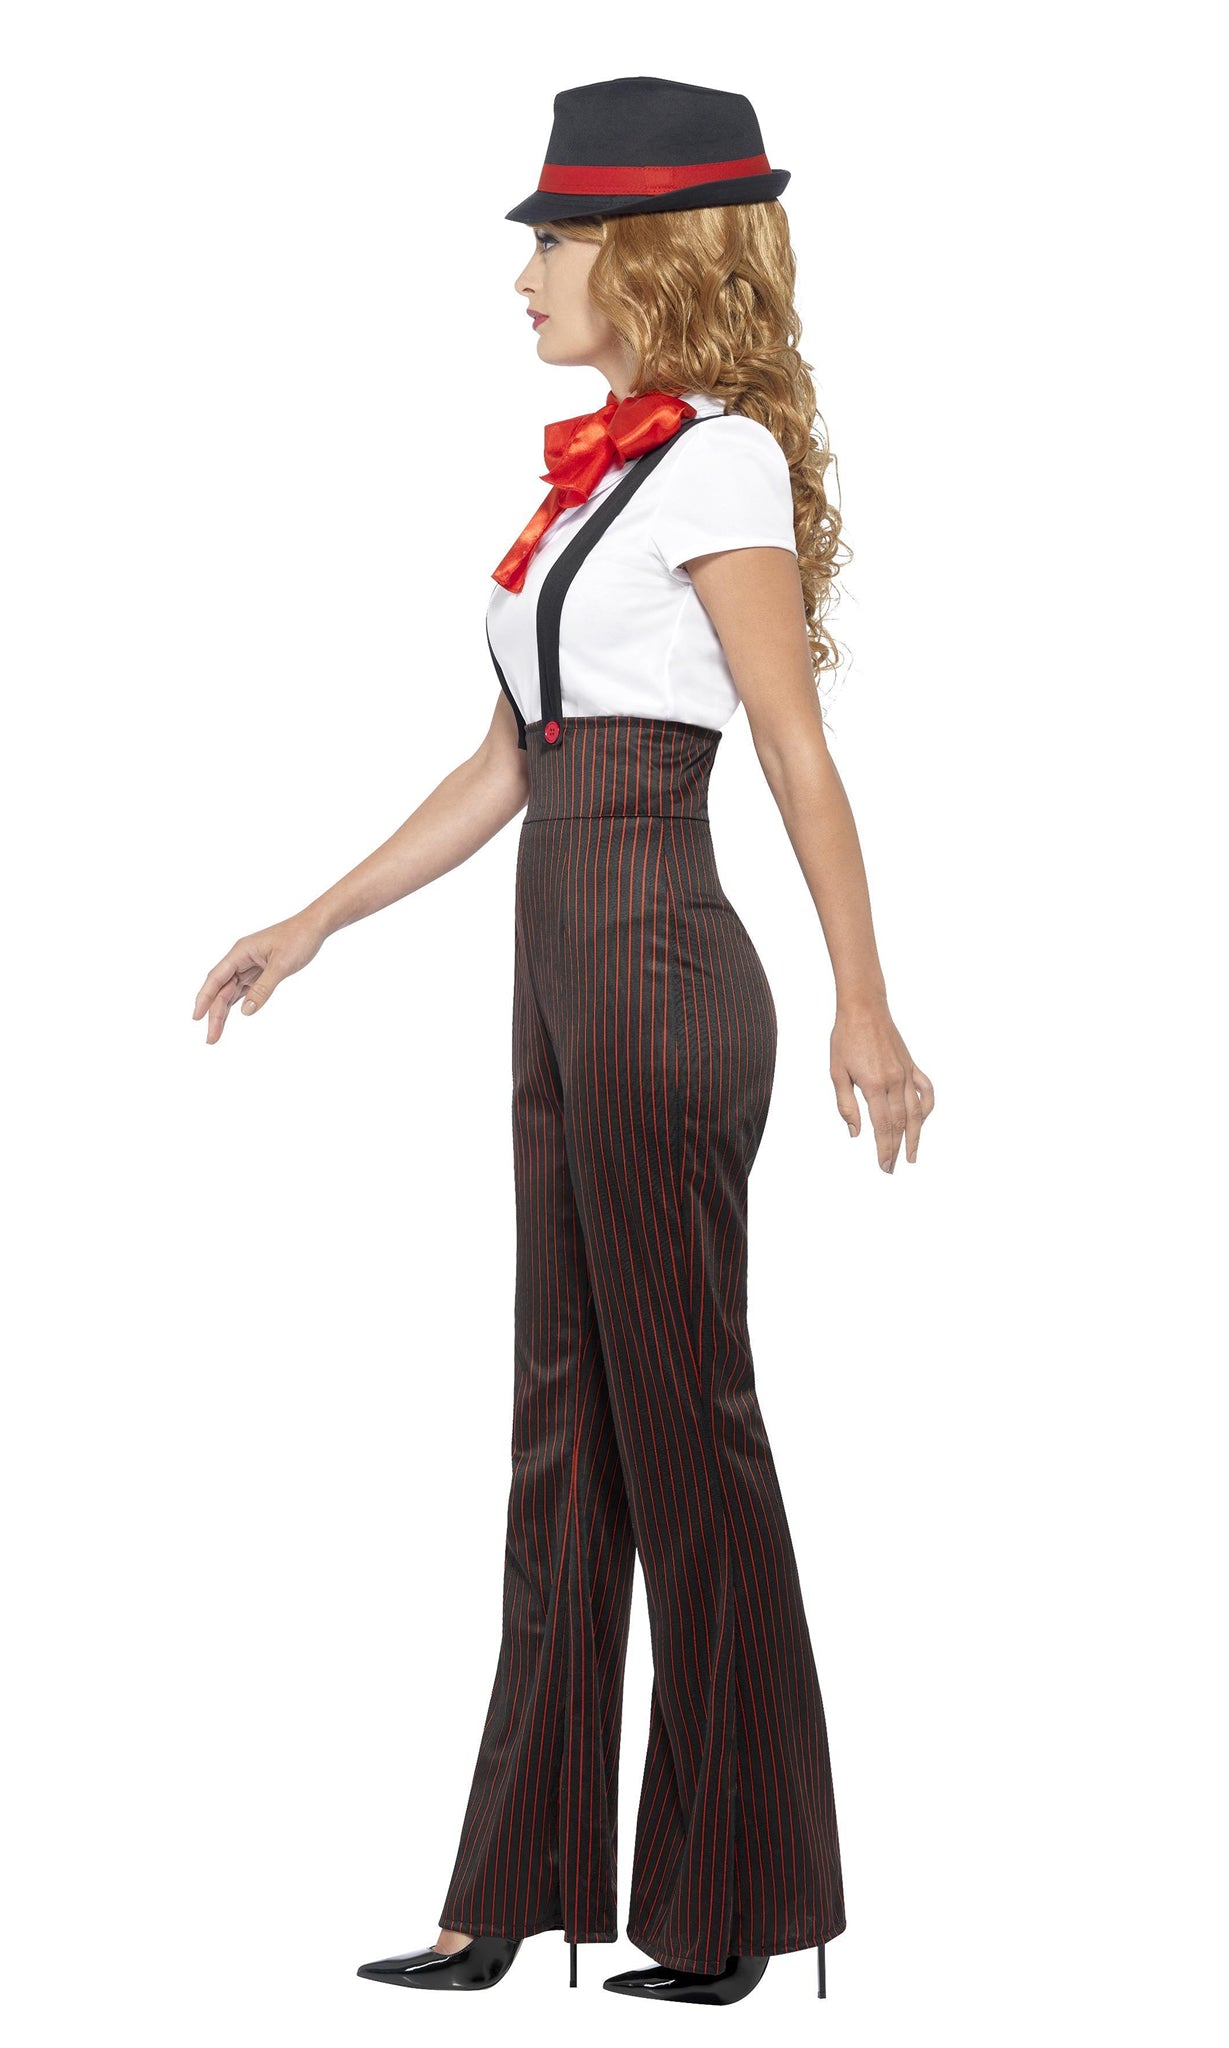 Side of pin stripe woman's gangster costume with mock braces and hat with red band